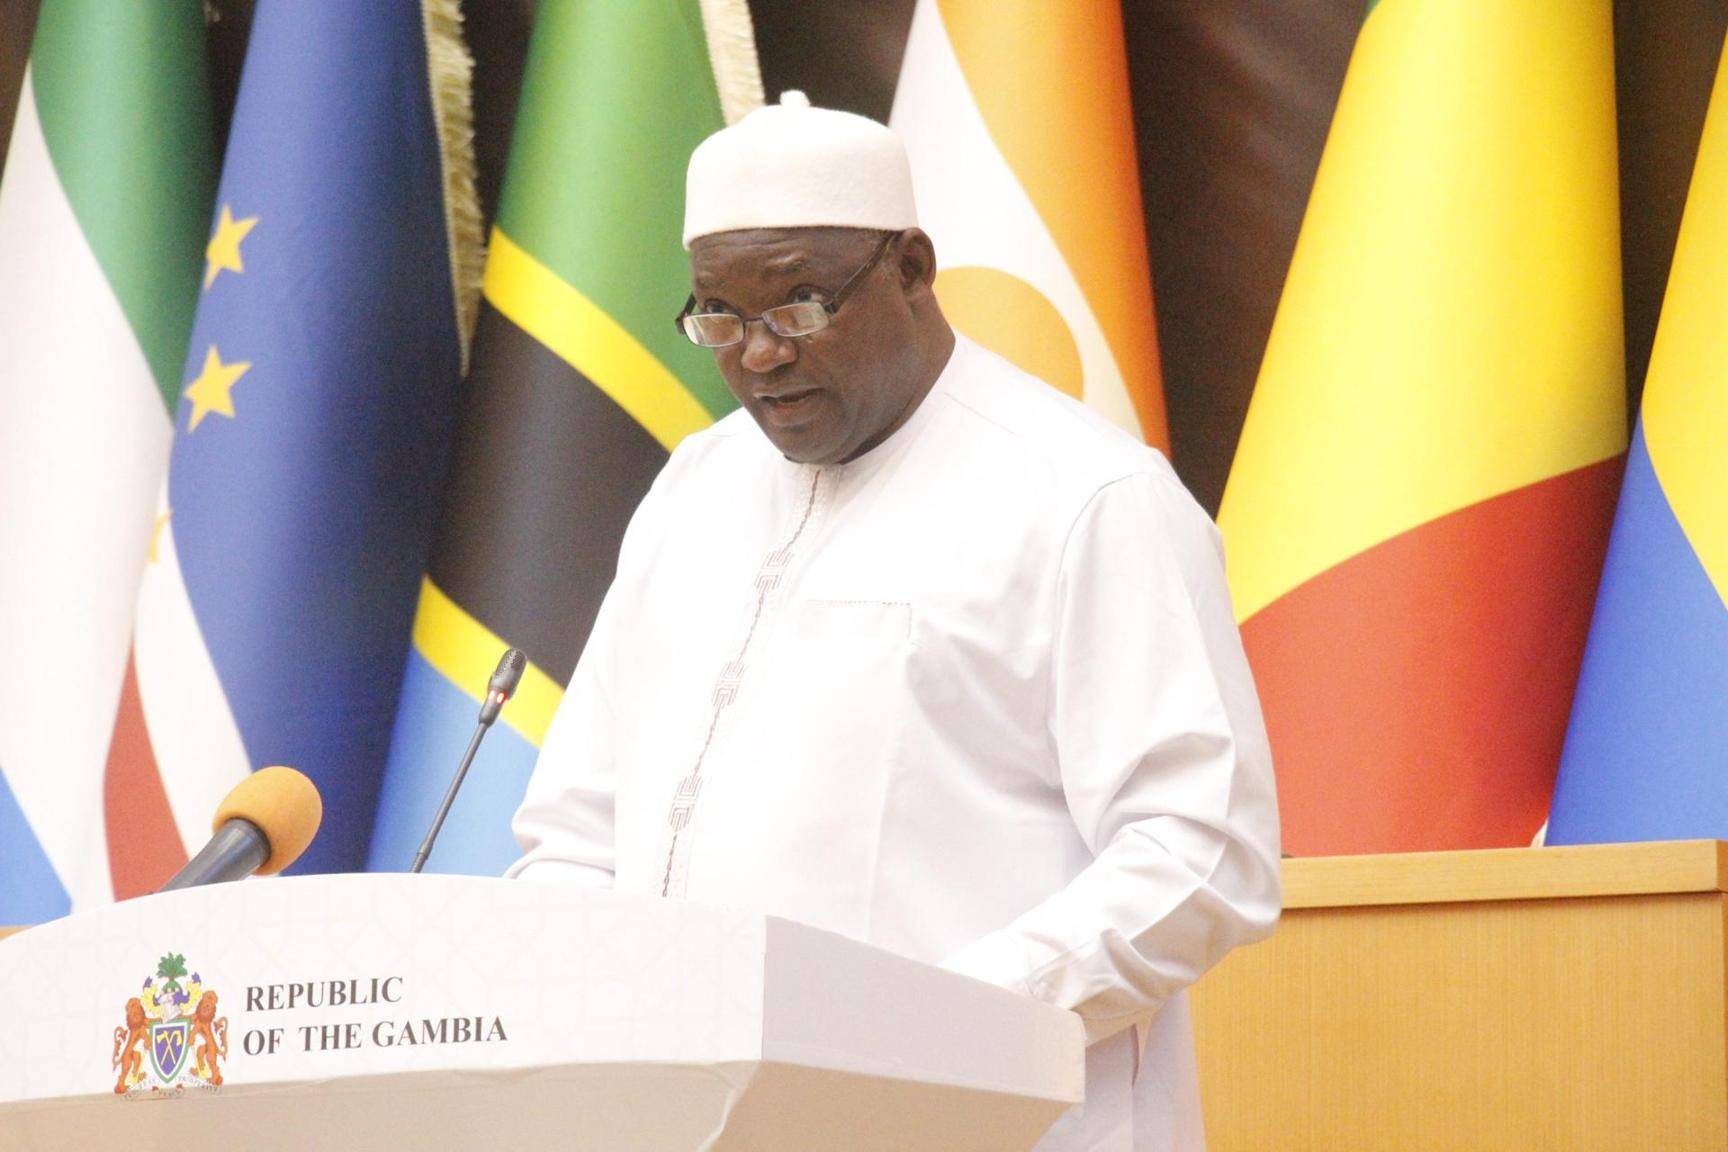 President Adama Barrow GMRG at the Conference of African Ulama and Religious Affairs Ministers